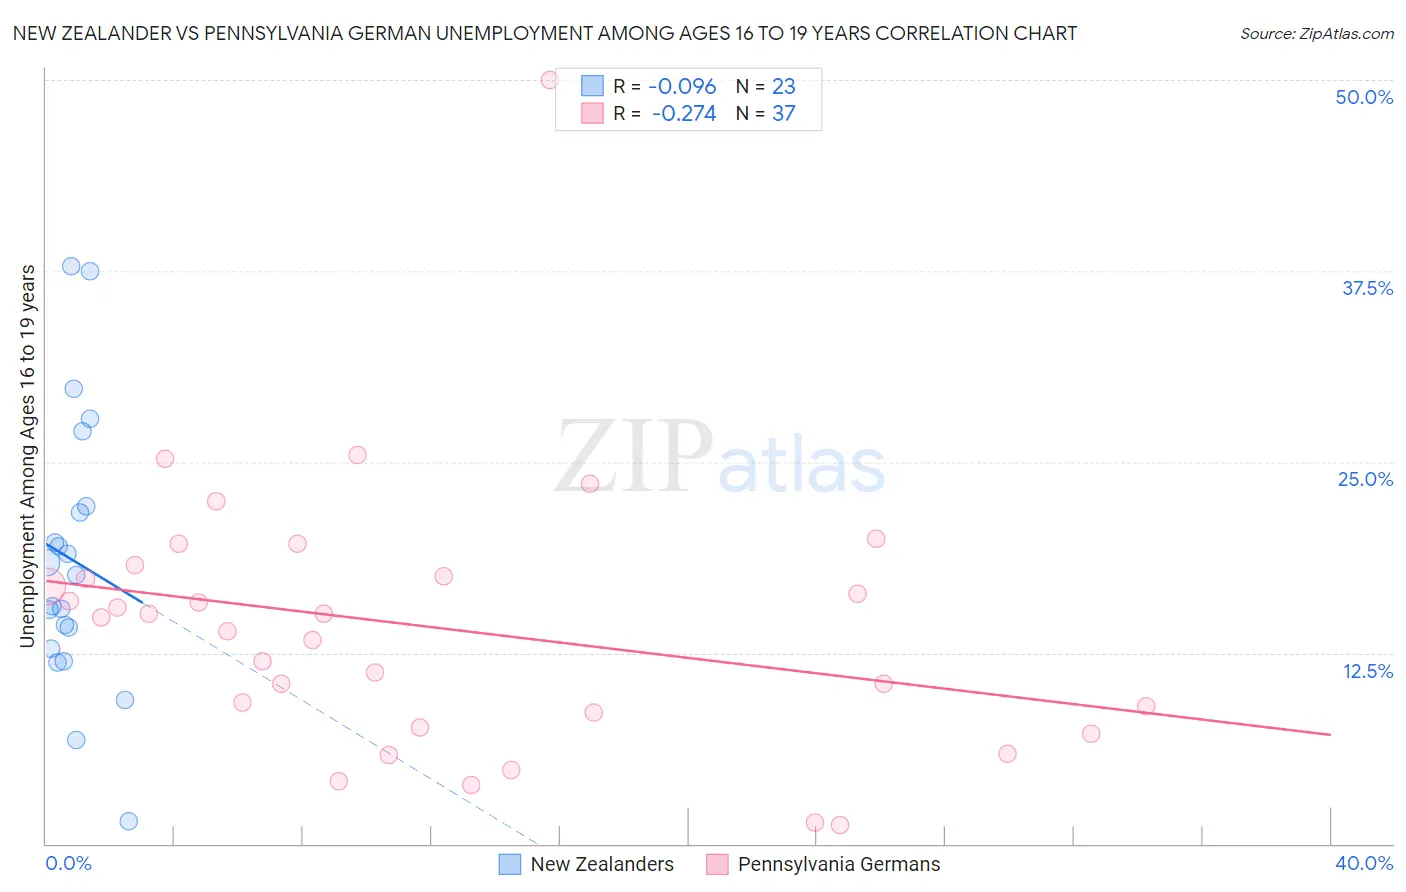 New Zealander vs Pennsylvania German Unemployment Among Ages 16 to 19 years